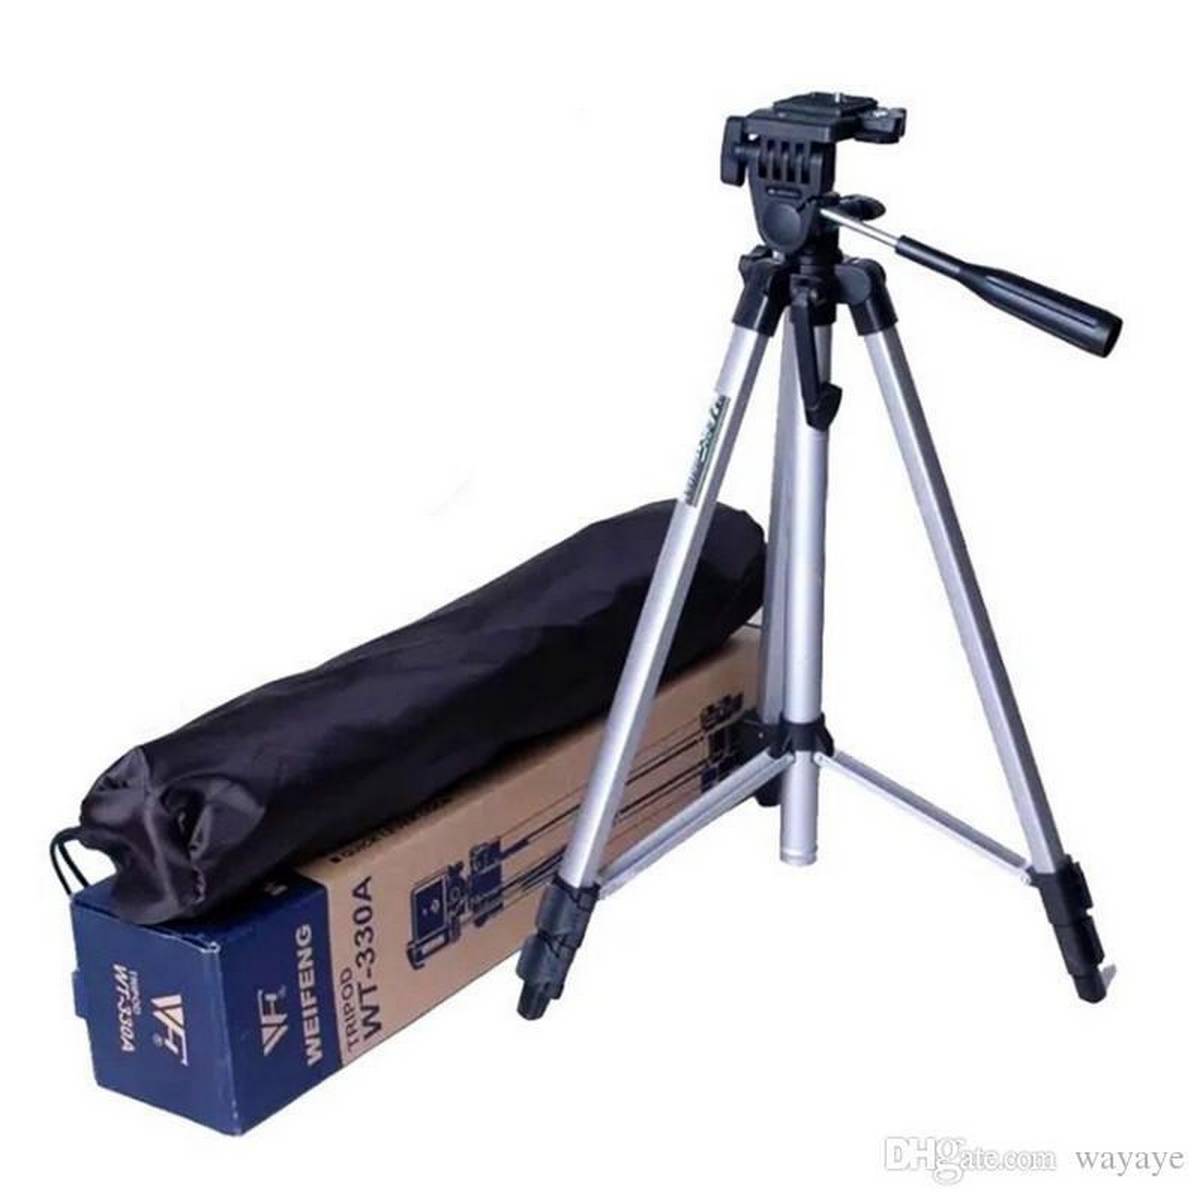 WEIFENG WT-330A PROFESSIONAL TRIPOD STAND ALUMINUM – SILVER